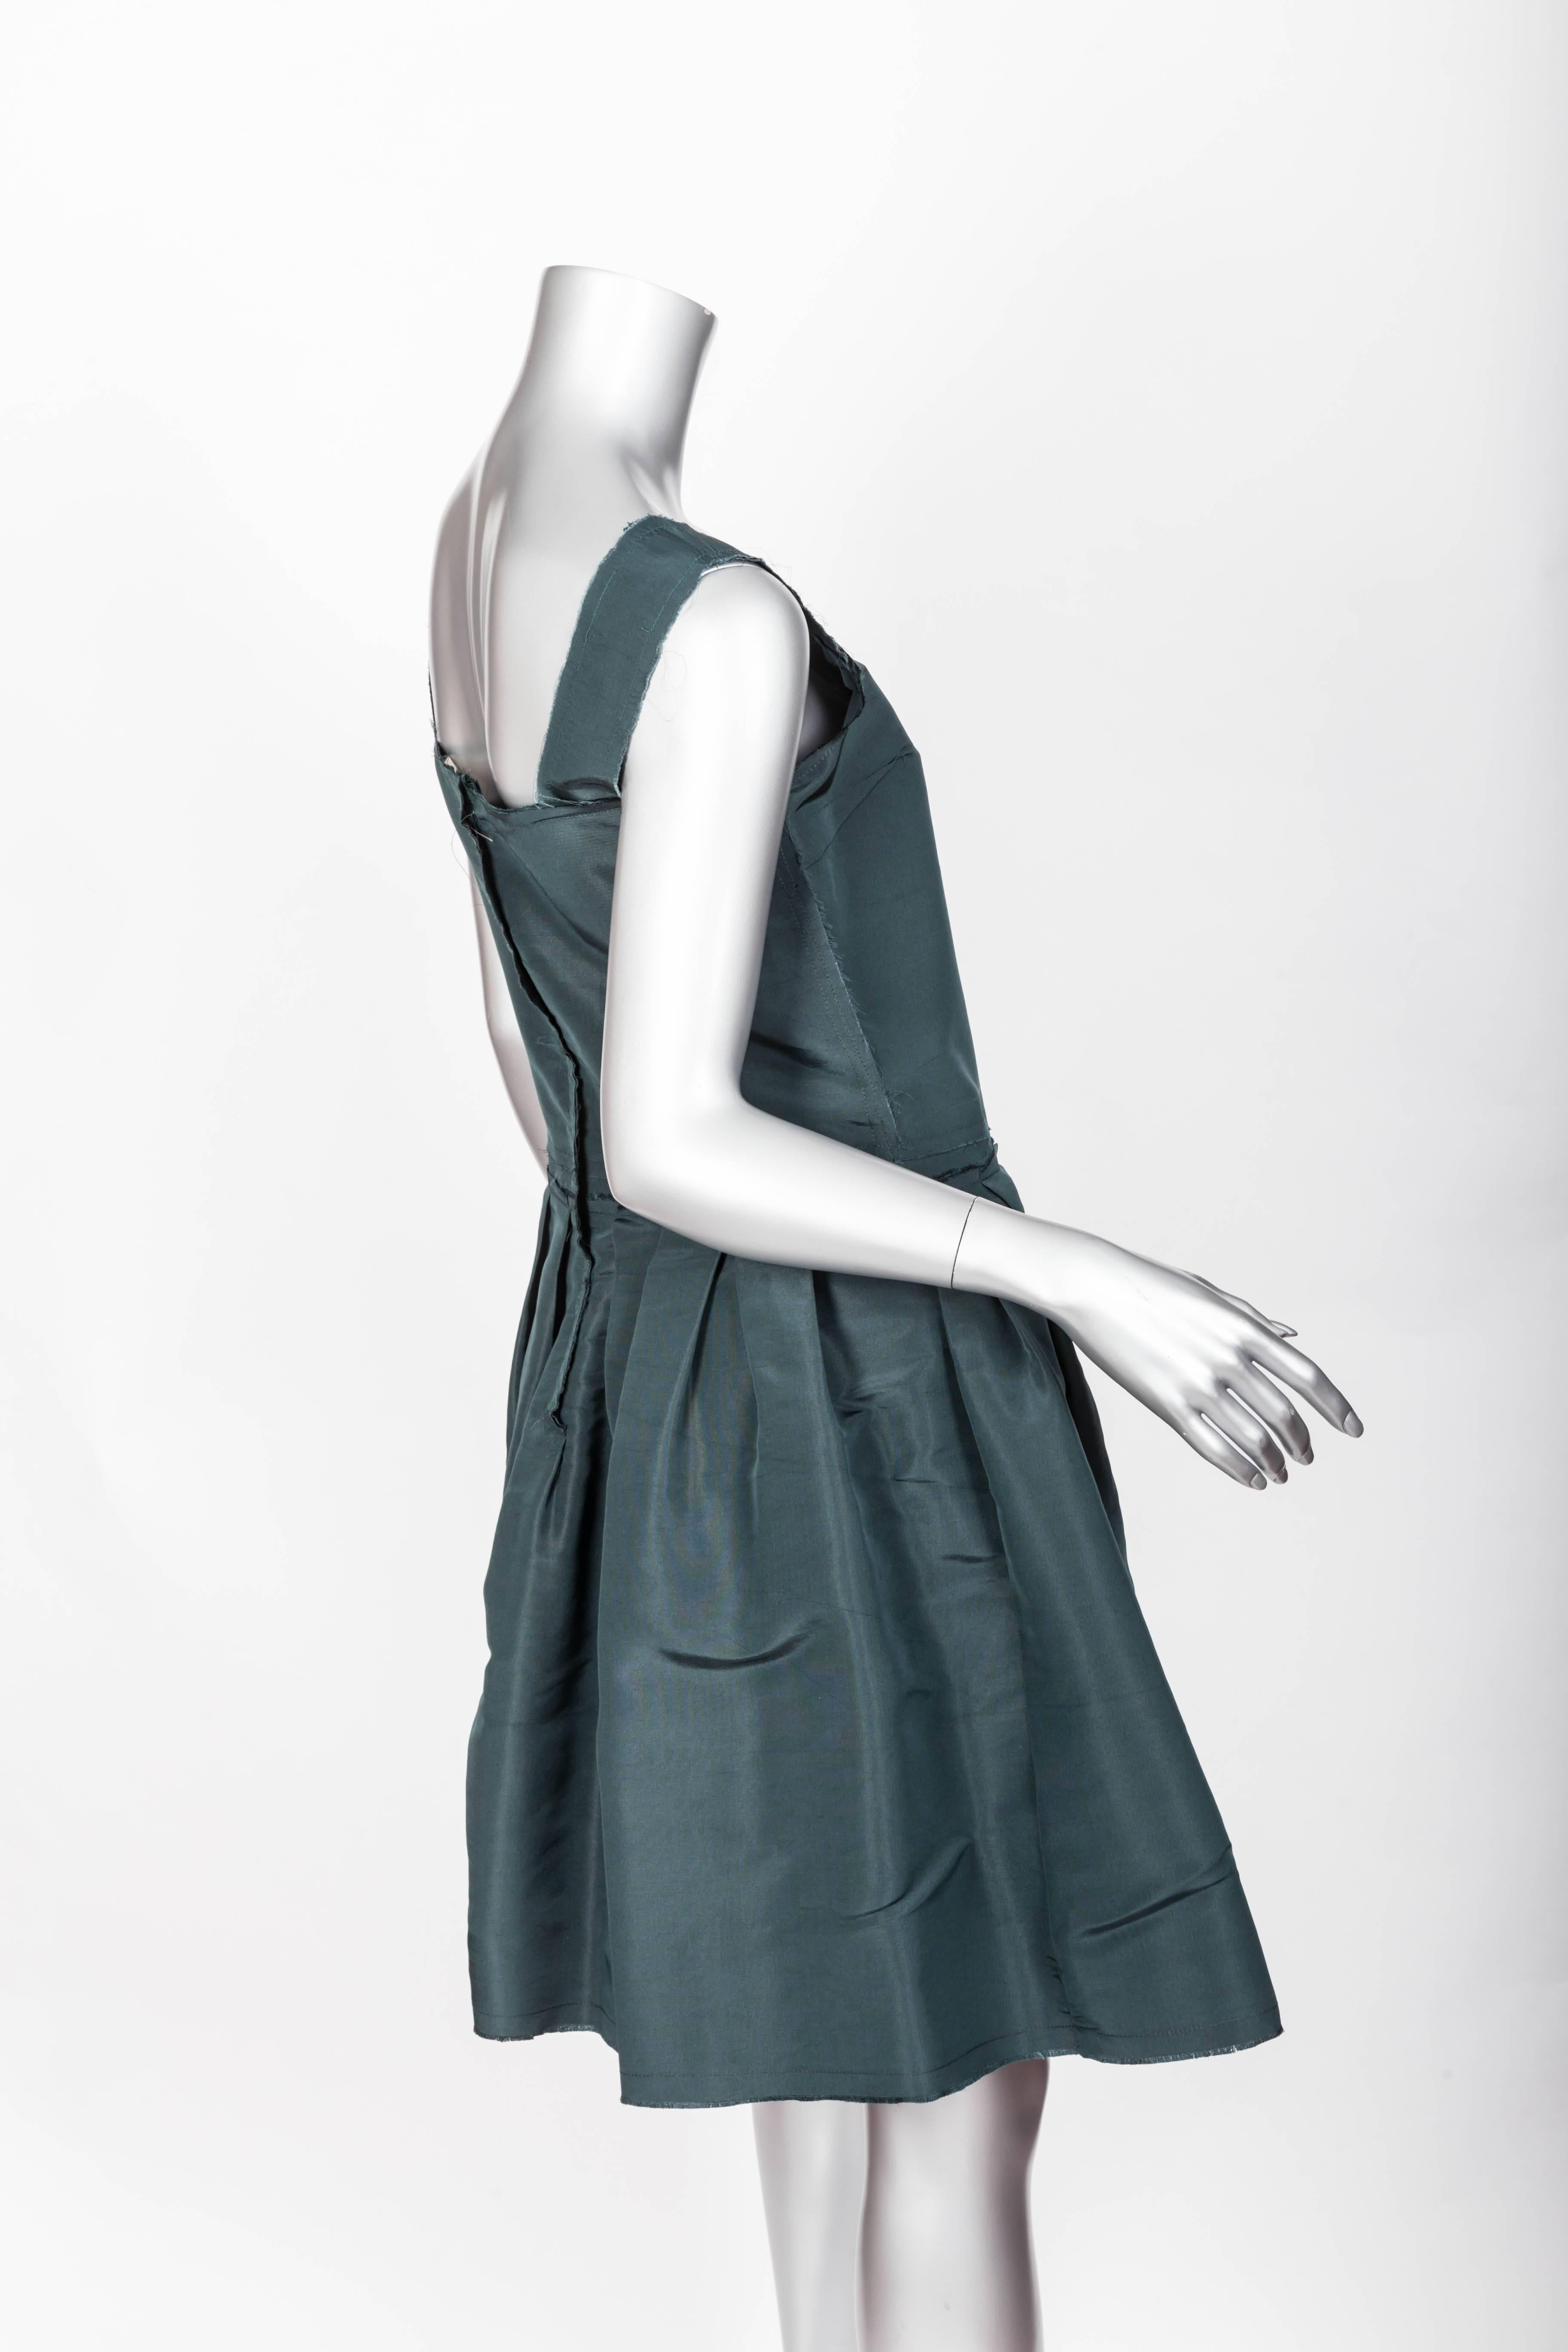 Great Dark Green Silk Lanvin Dress - Size 40
With beautifully raw edges this fabulous Lanvin dress is both chic and great fun.
Condition is Excellent.